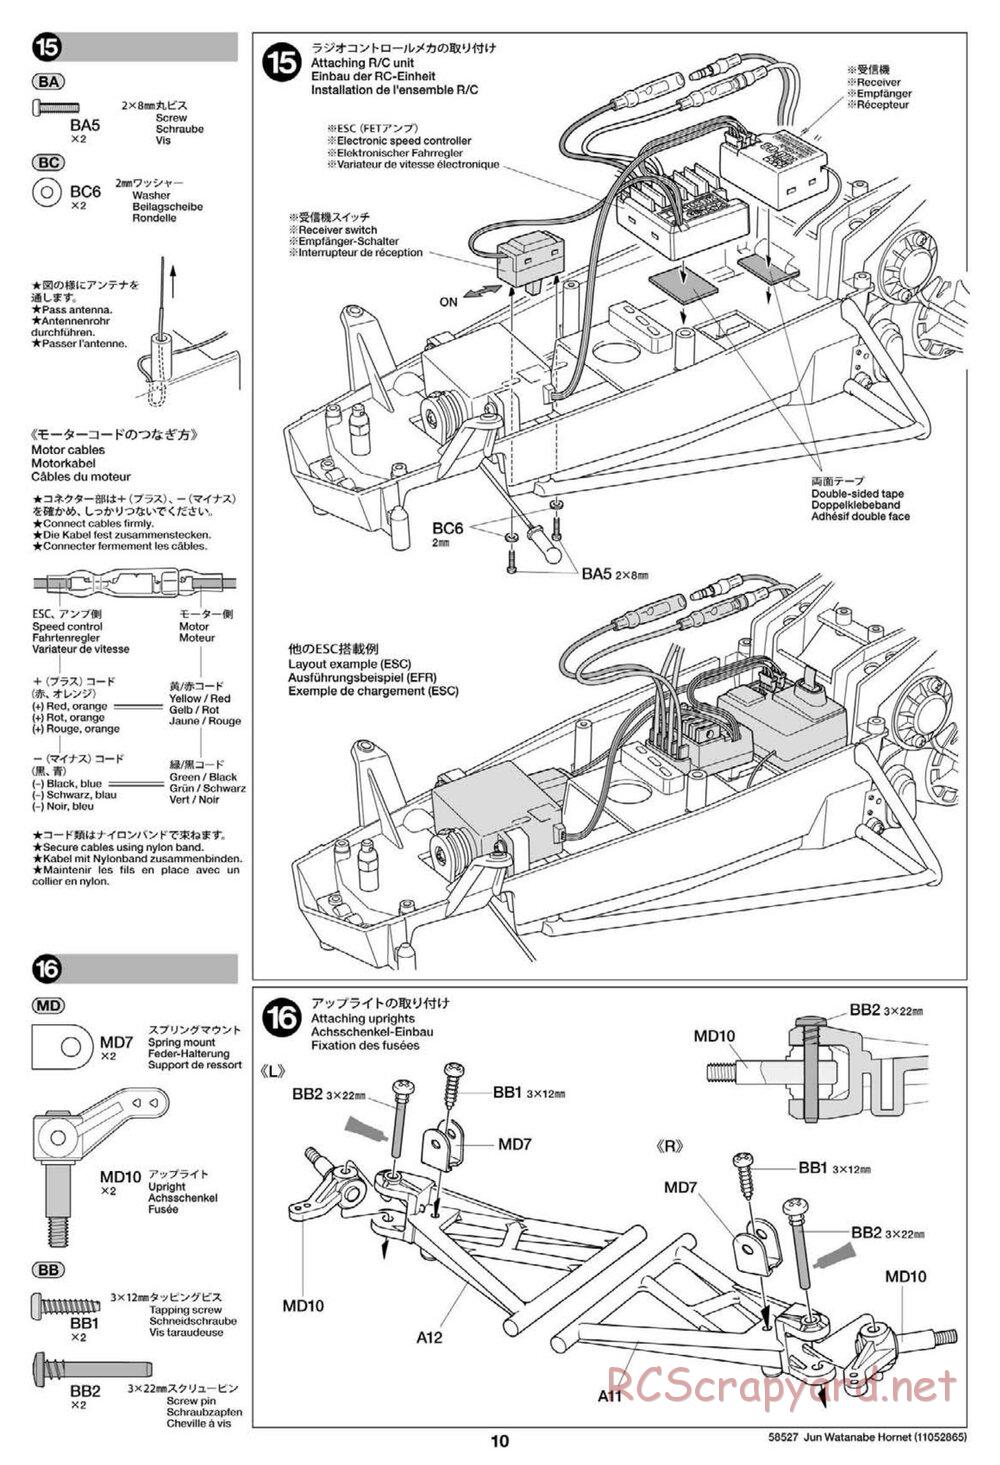 Tamiya - The Hornet by Jun Watanabe - GH Chassis - Manual - Page 10